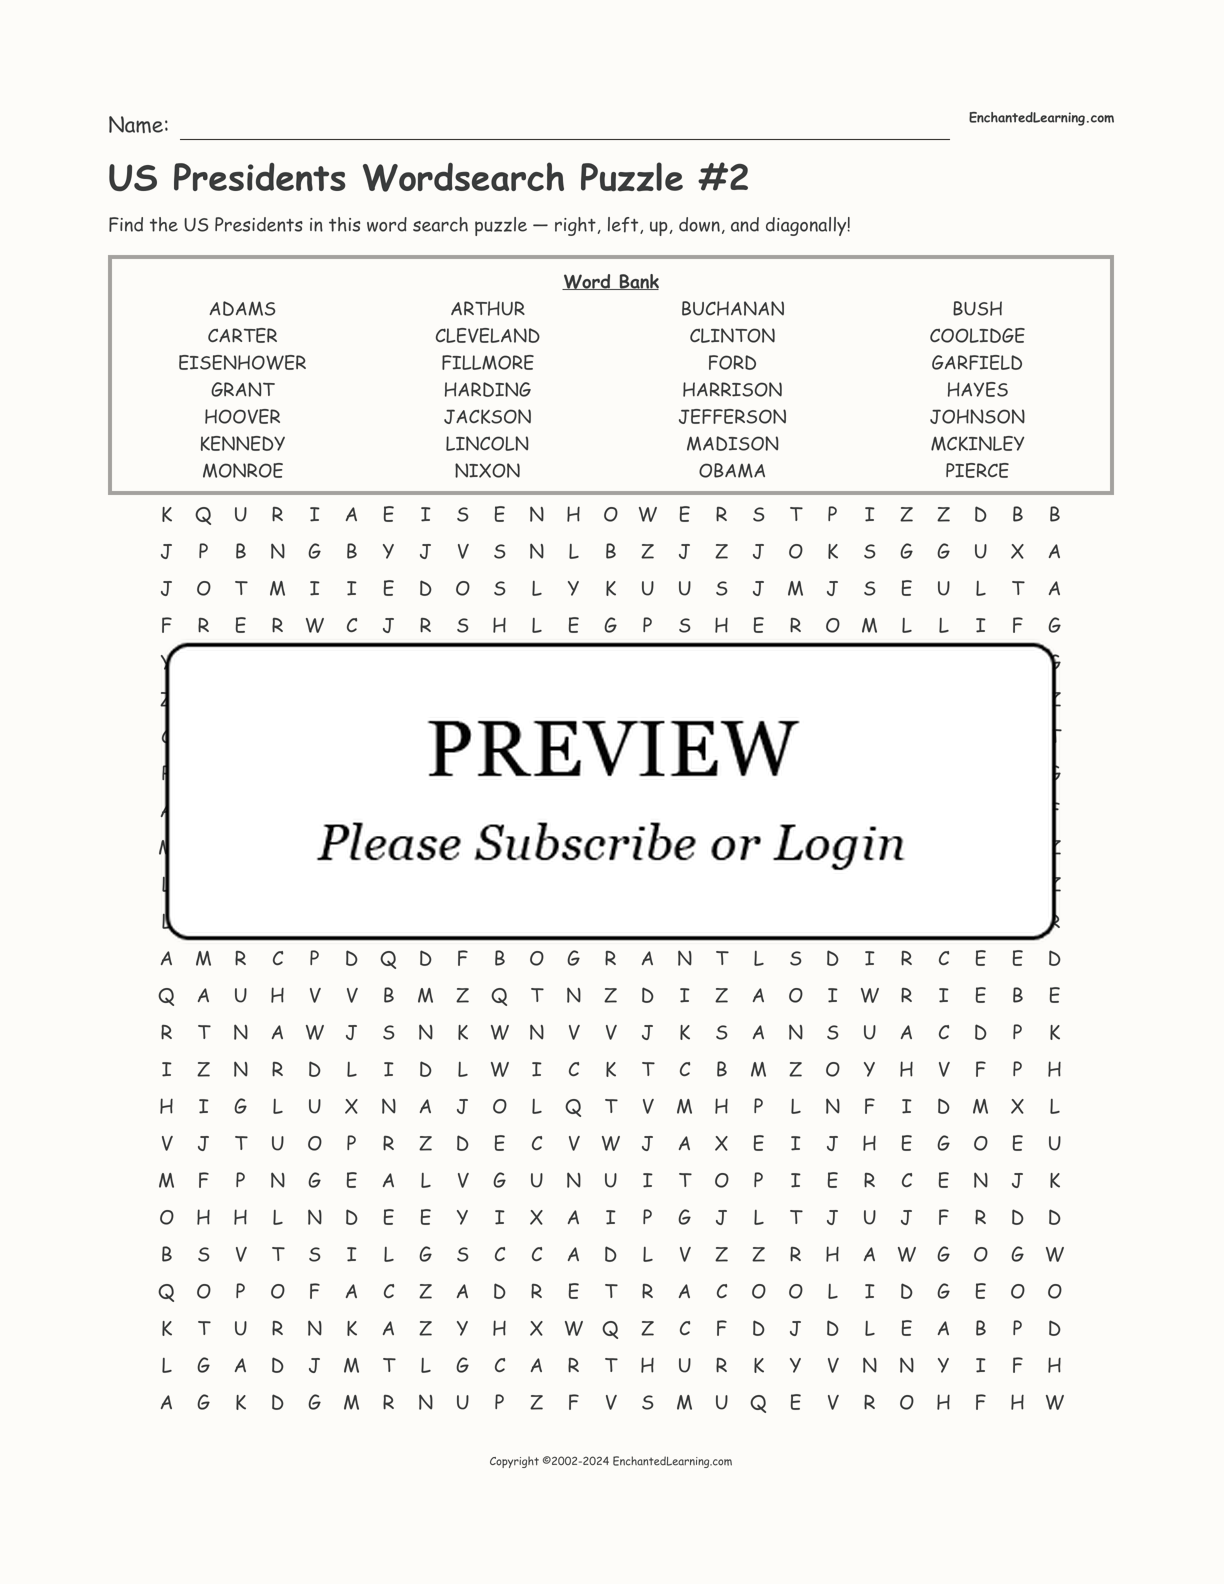 US Presidents Wordsearch Puzzle #2 interactive worksheet page 1